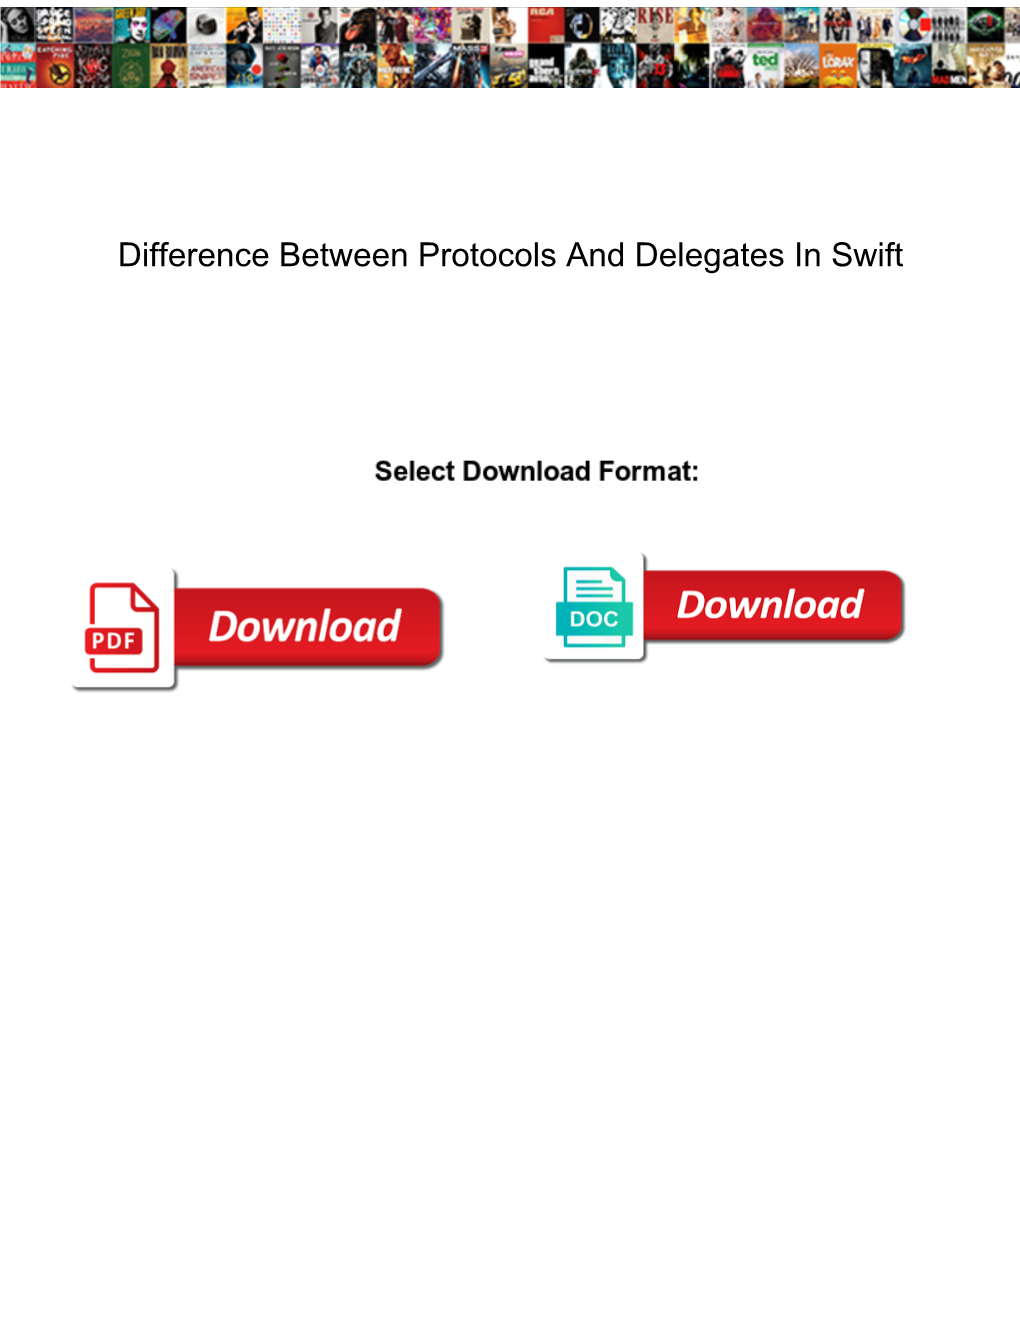 Difference Between Protocols and Delegates in Swift